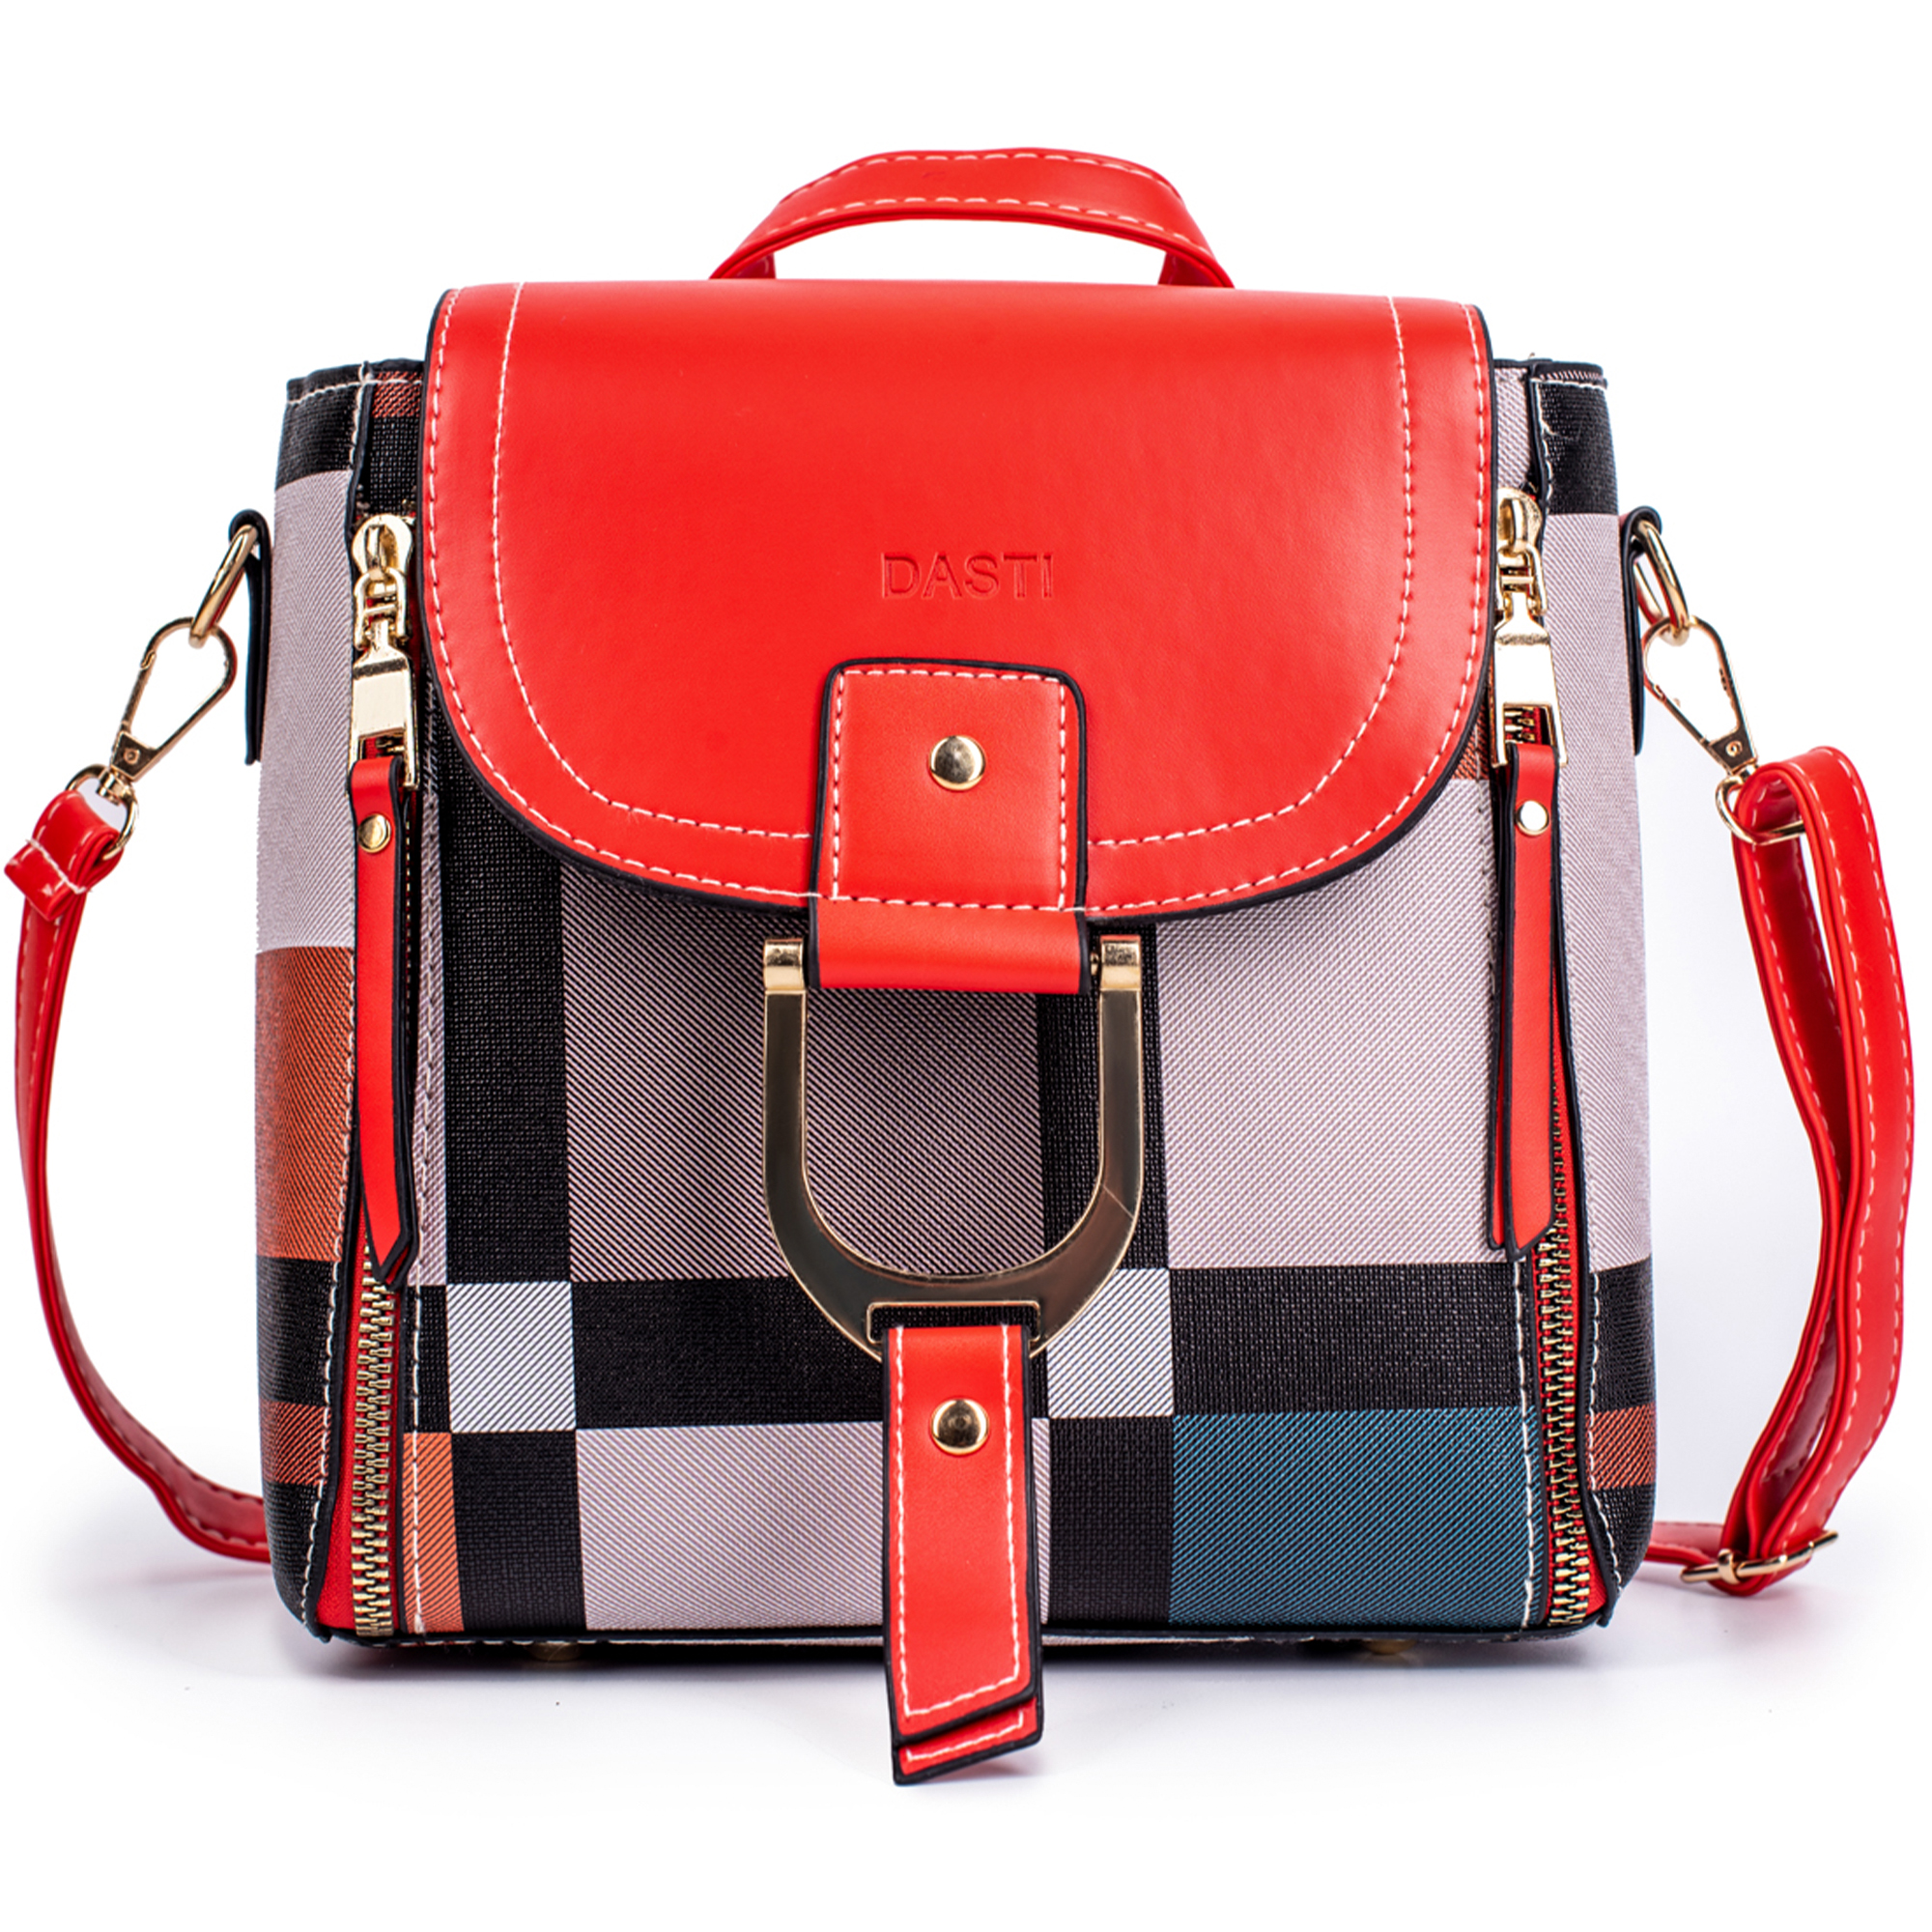 Plaid Leather Small Backpack Purse Red Purses Back Pack for Women - image 1 of 3